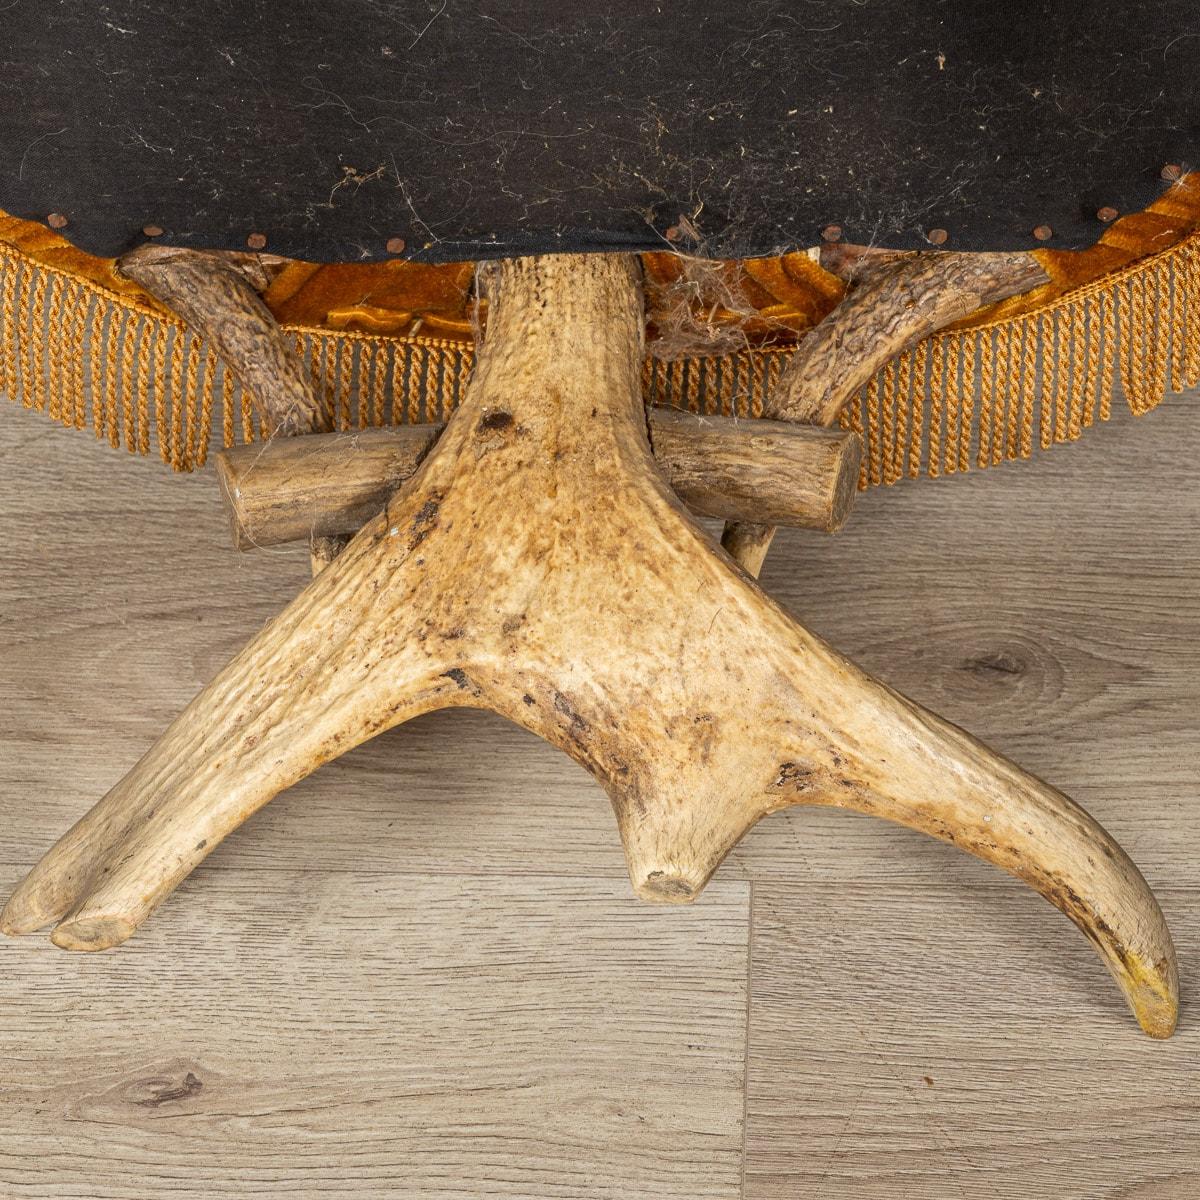 19th Century Swiss-German Black Forest Antler Horn Throne Chair For Sale 15